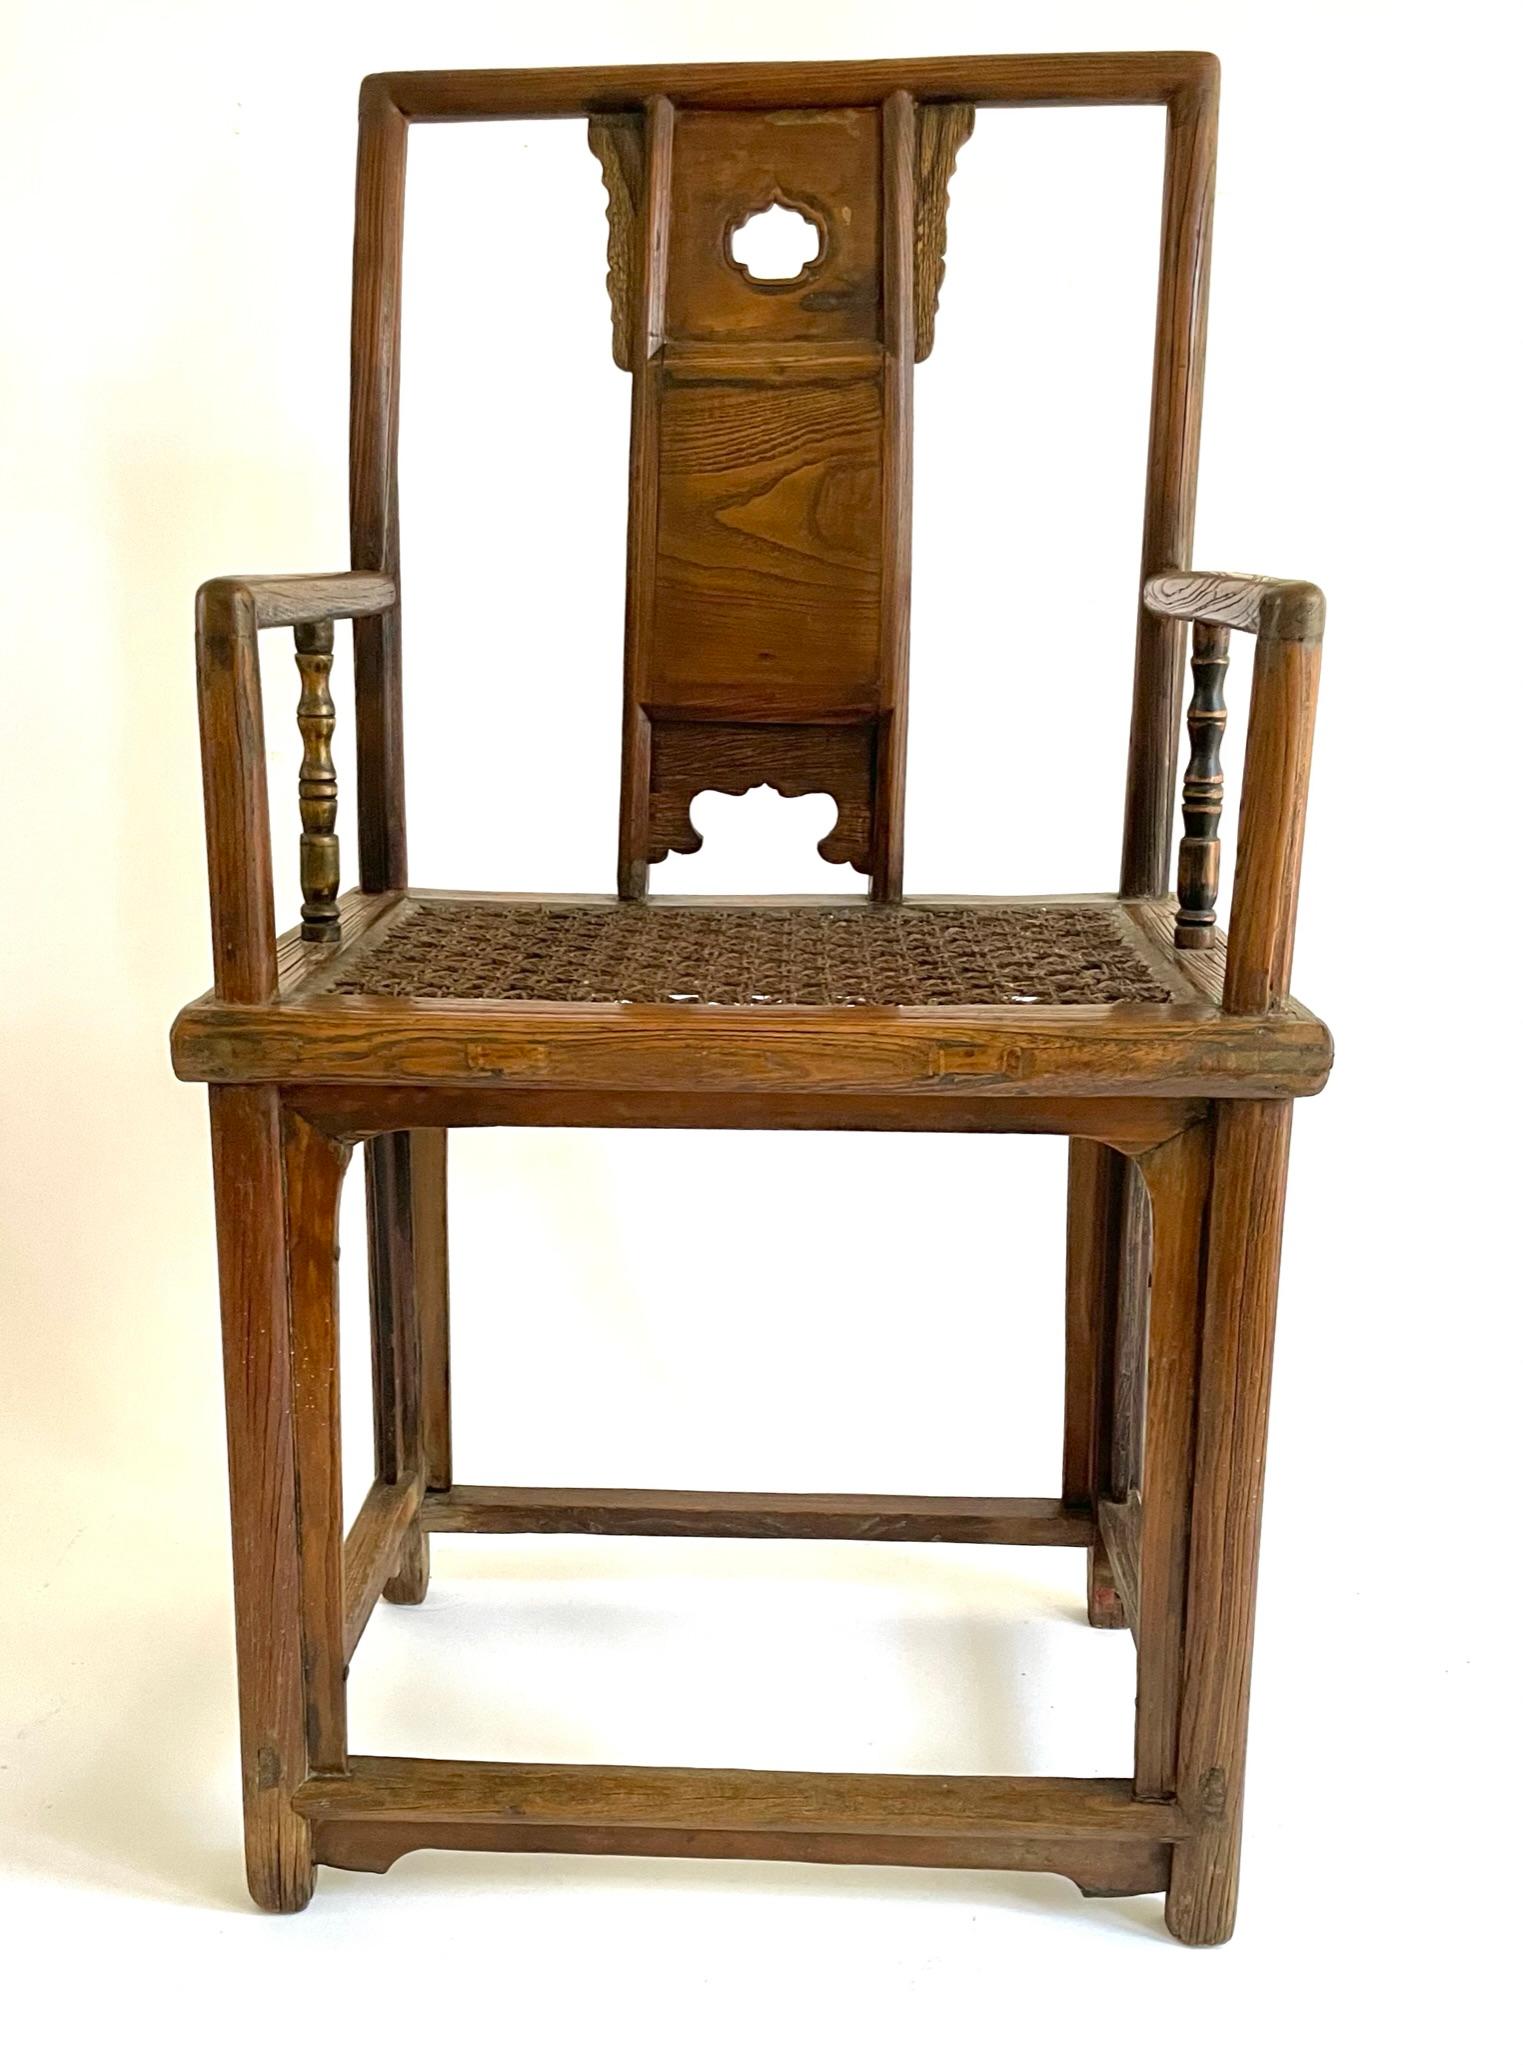 This Nicely proportioned Qing Dyanty, Chinese armchair with simple Ming lines is handcrafted with Northern Elm (Yumu) using traditional mortise and tenon joinery. The seat has been rewoven with burlap yarn, sometime within its lifetime. The arm has